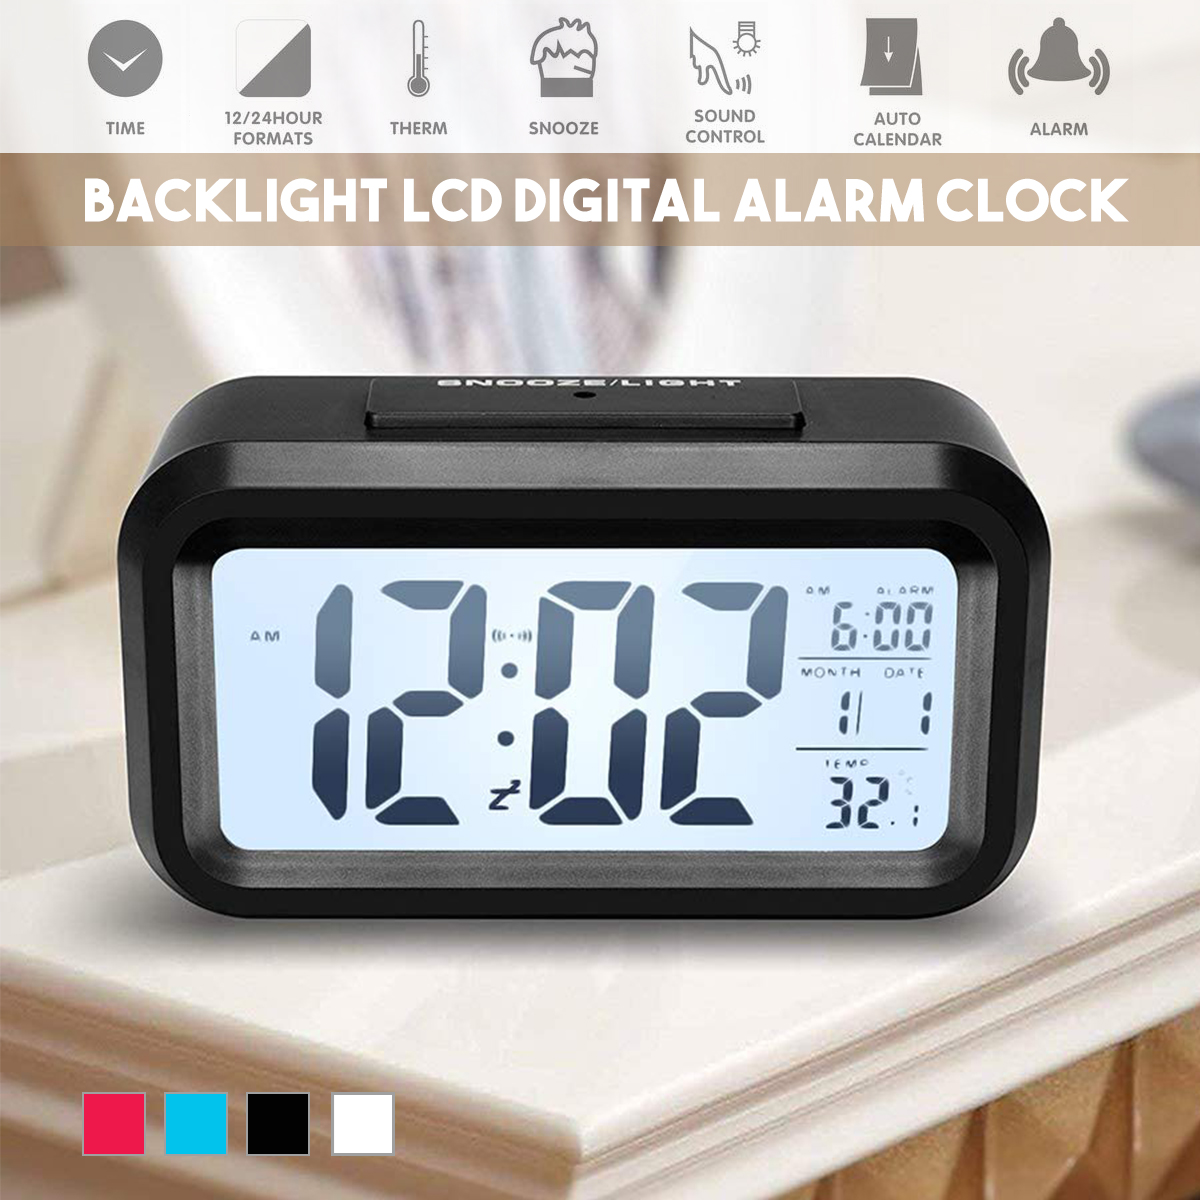 Backlight-LCD-Digital-Alarm-Clock-45quot32quot-Large-Display-Night-Light-with-Calendar-Thermometer-E-1760102-1